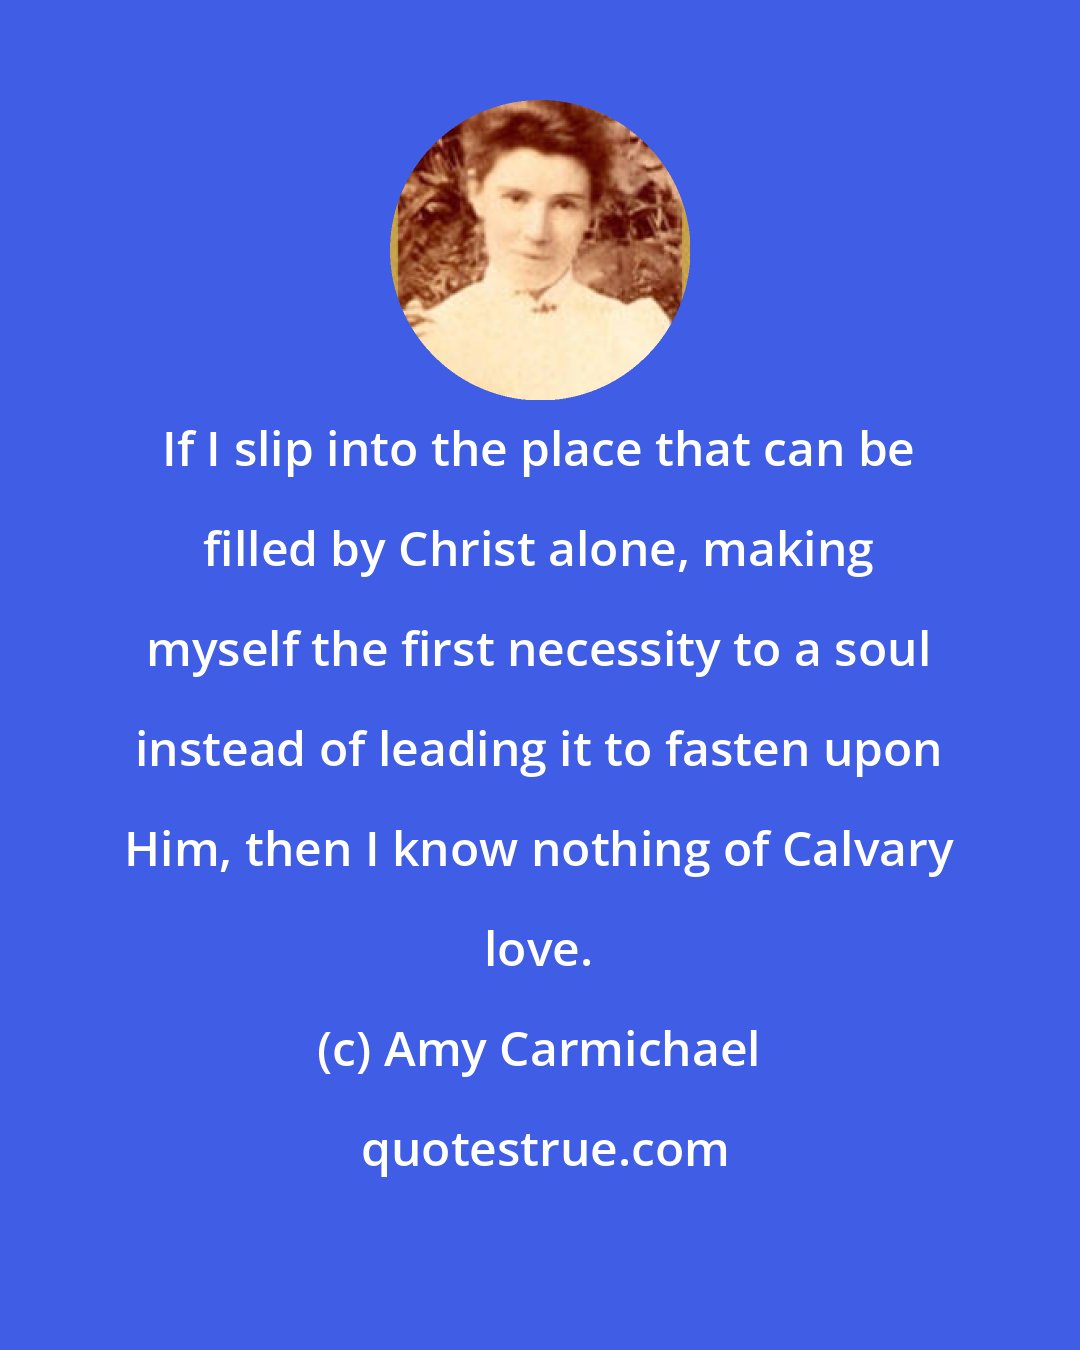 Amy Carmichael: If I slip into the place that can be filled by Christ alone, making myself the first necessity to a soul instead of leading it to fasten upon Him, then I know nothing of Calvary love.